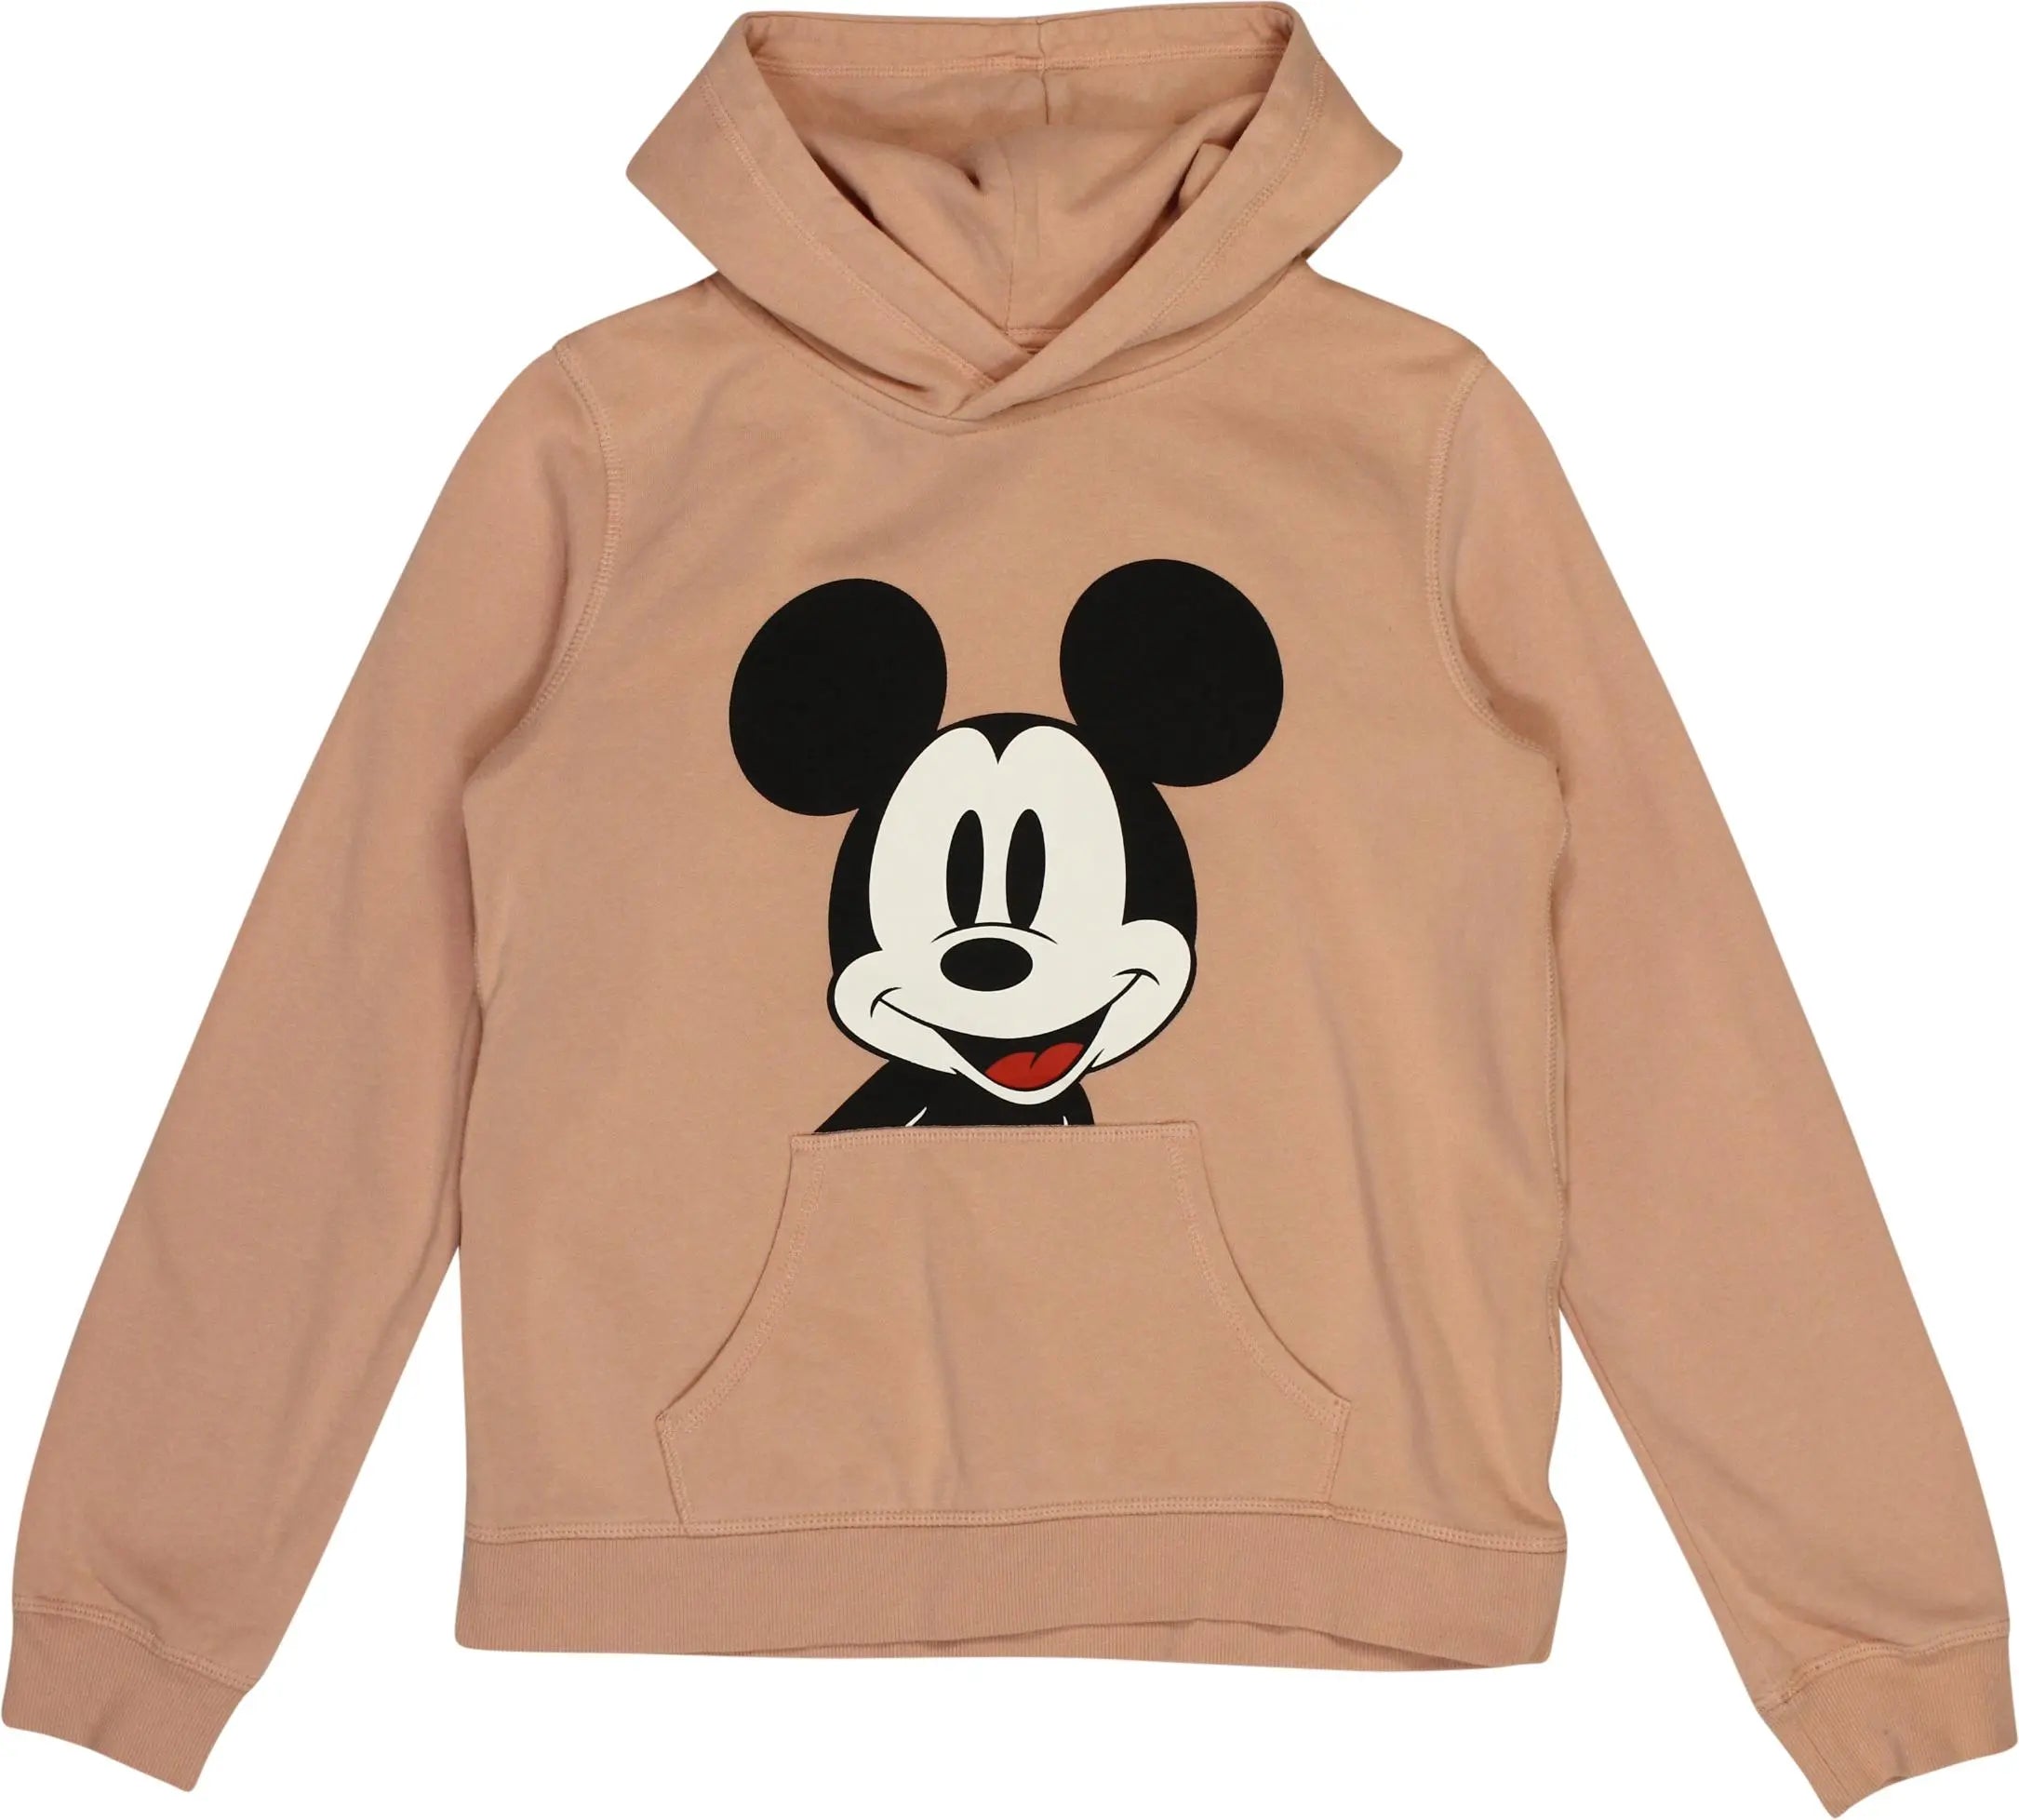 H&M - Pink Disney Hoodie- ThriftTale.com - Vintage and second handclothing